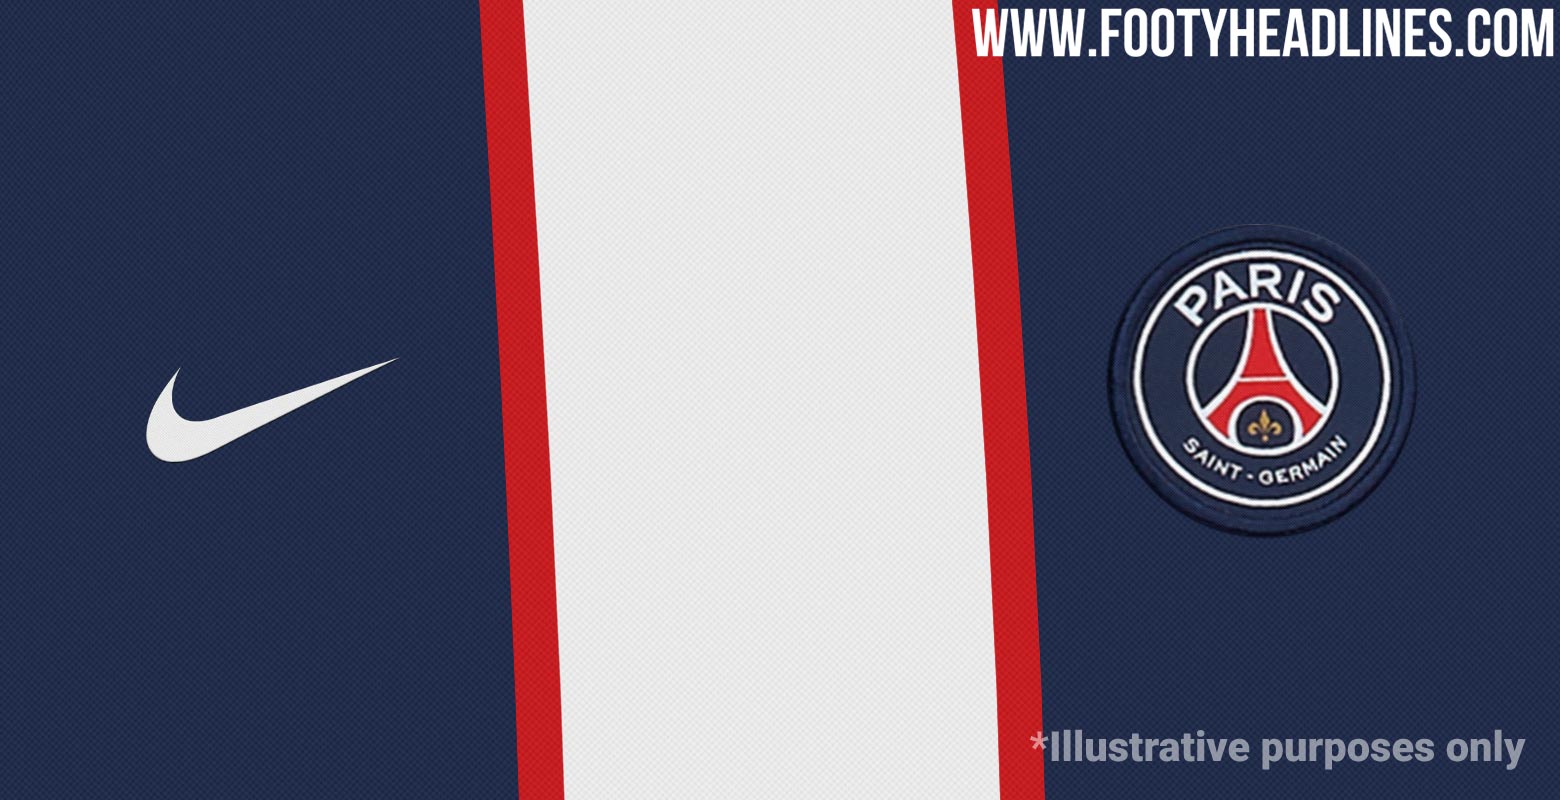 Yet Another One: PSG 22-23 Fourth Kit Font Revealed - Footy Headlines